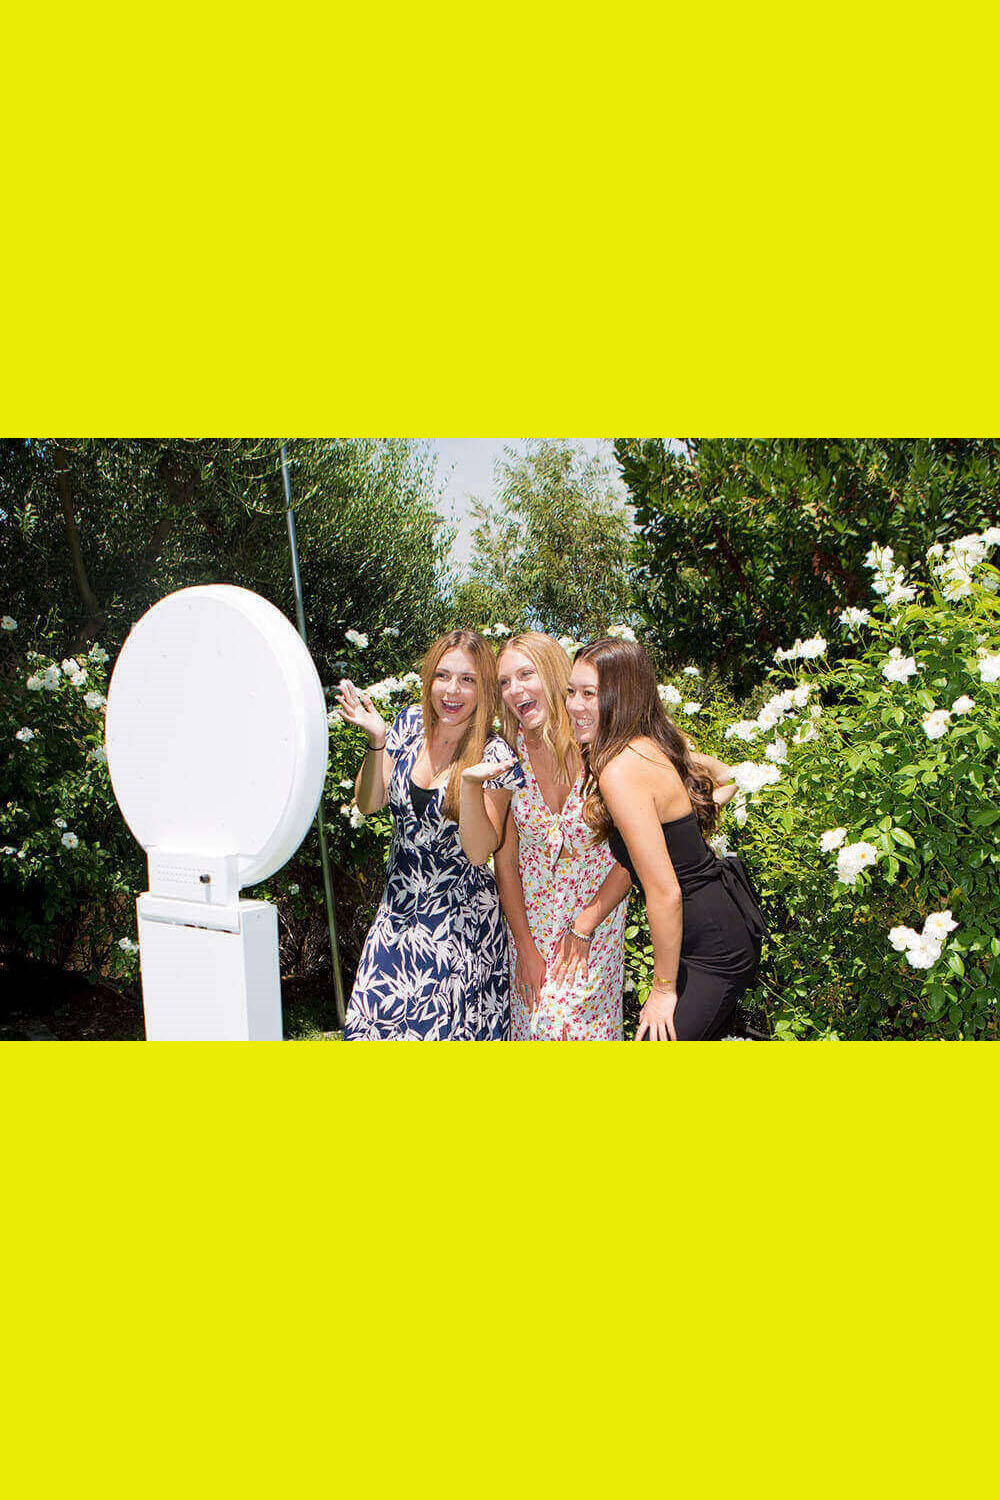 Three girls know how to have fun with this Simi Valley selfie station.